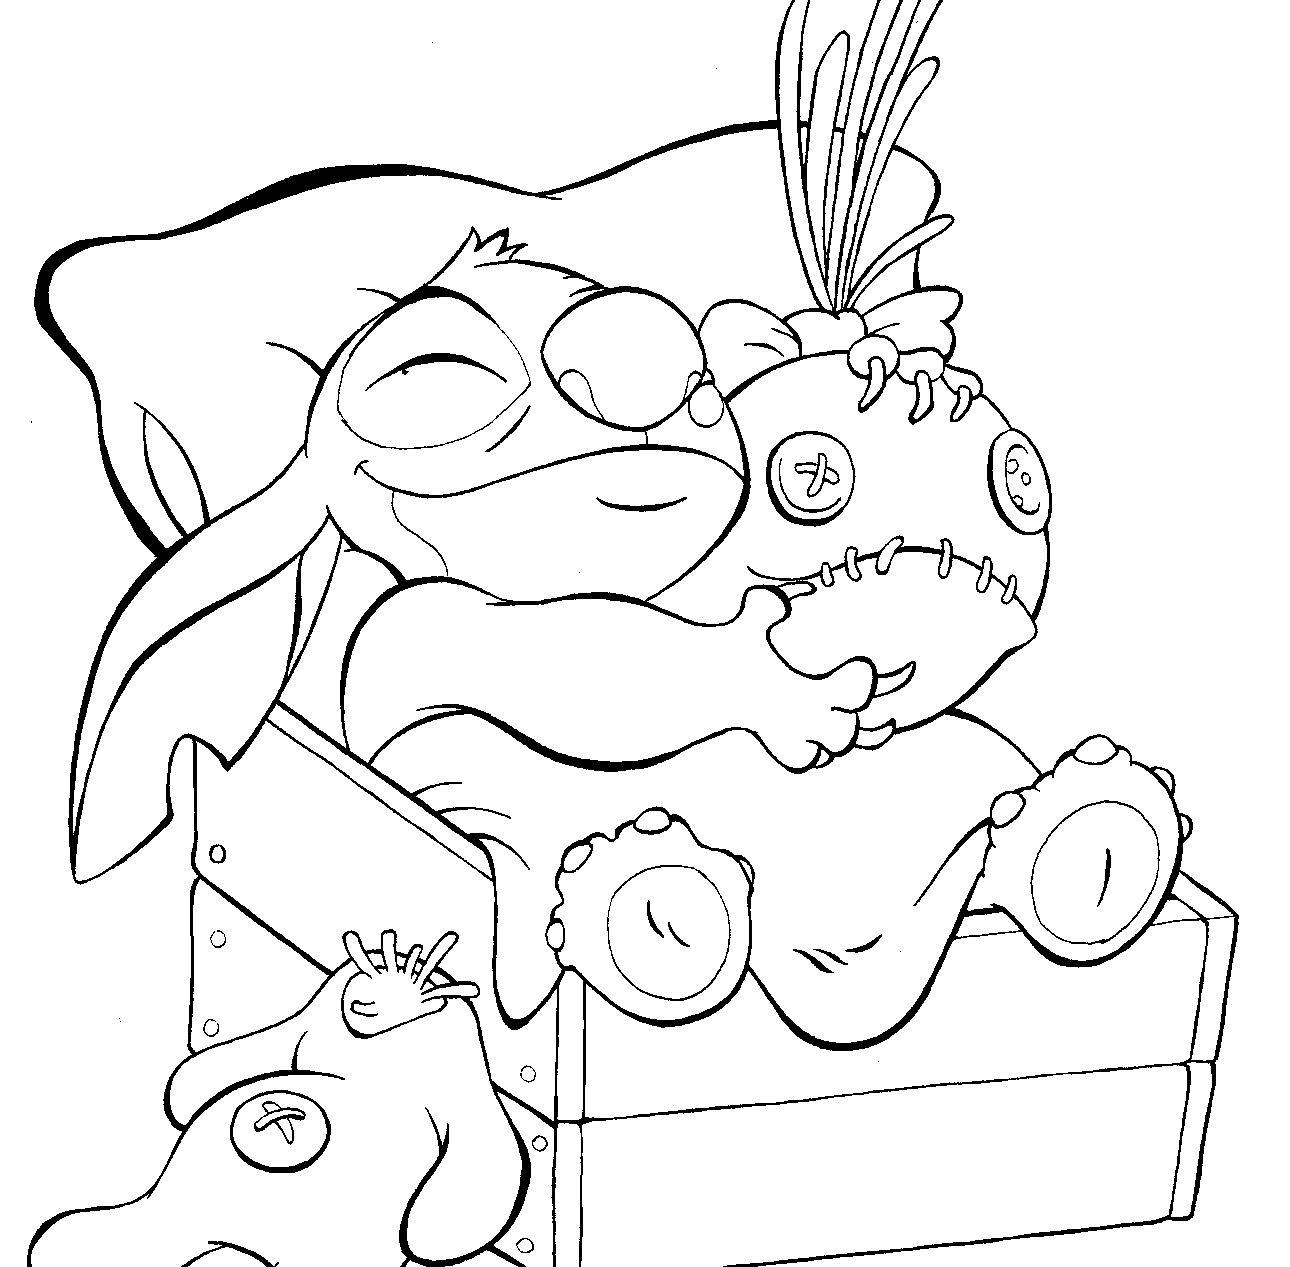 free-printable-lilo-and-stitch-coloring-pages-for-kids